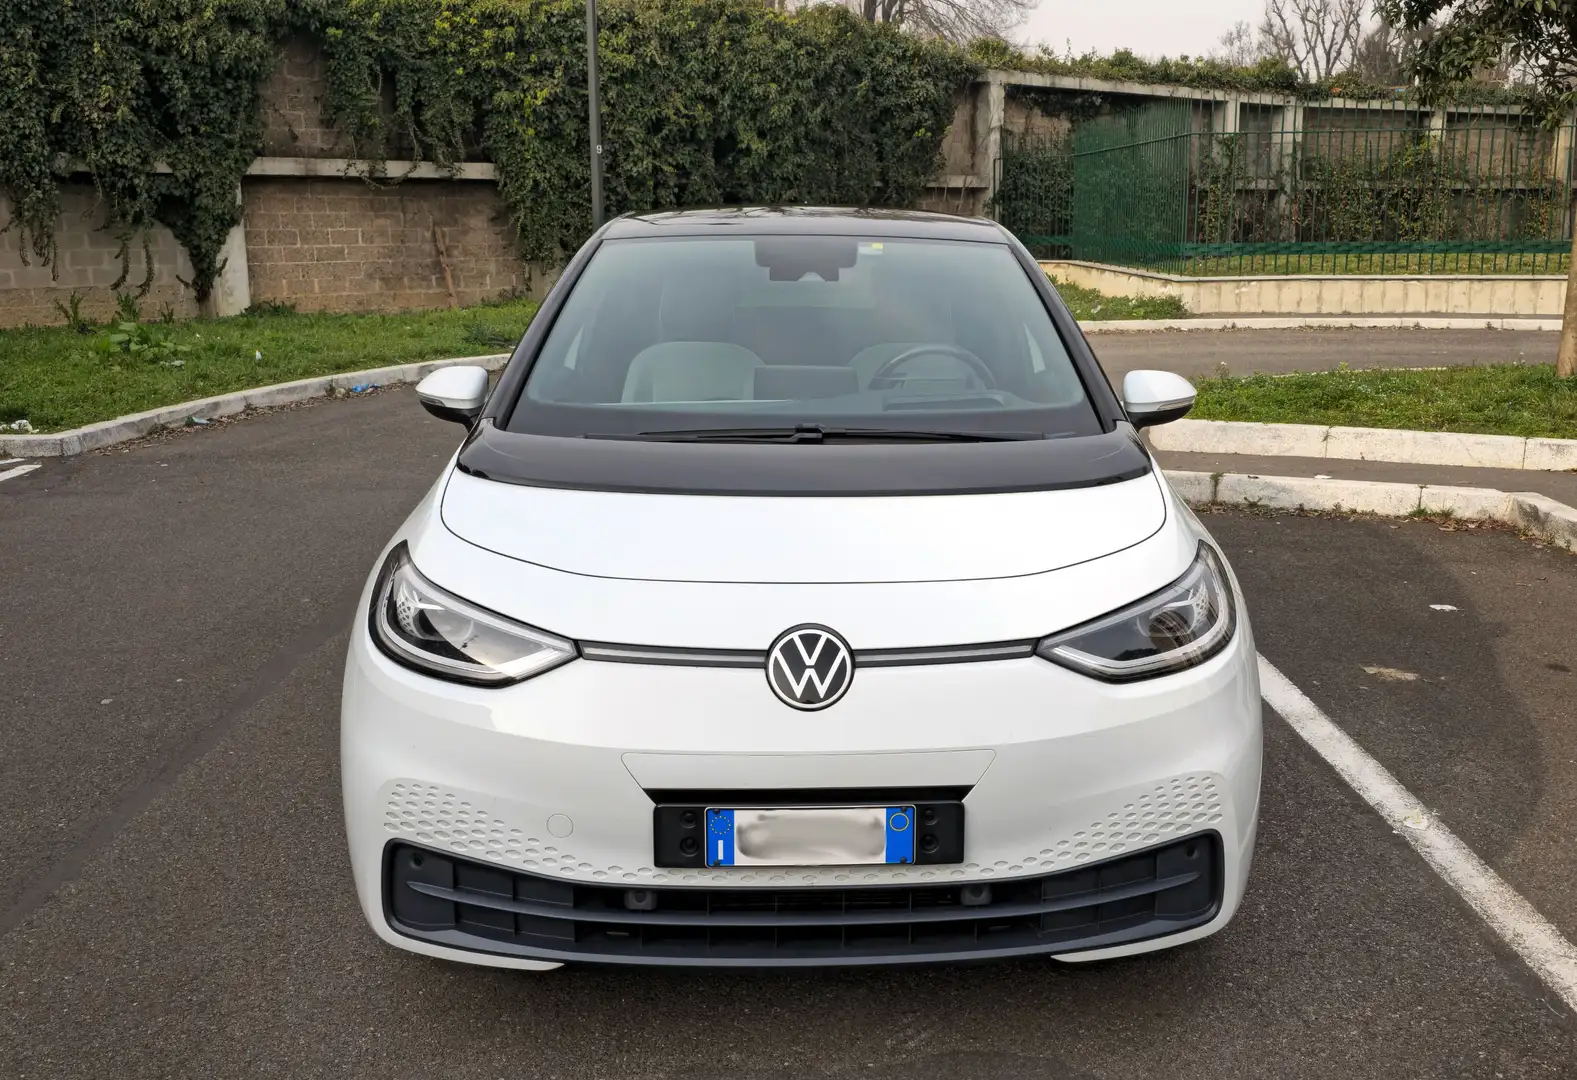 Volkswagen ID.3 ID.3 77 kWh Pro S - Allestimento Tour Bianco - 1